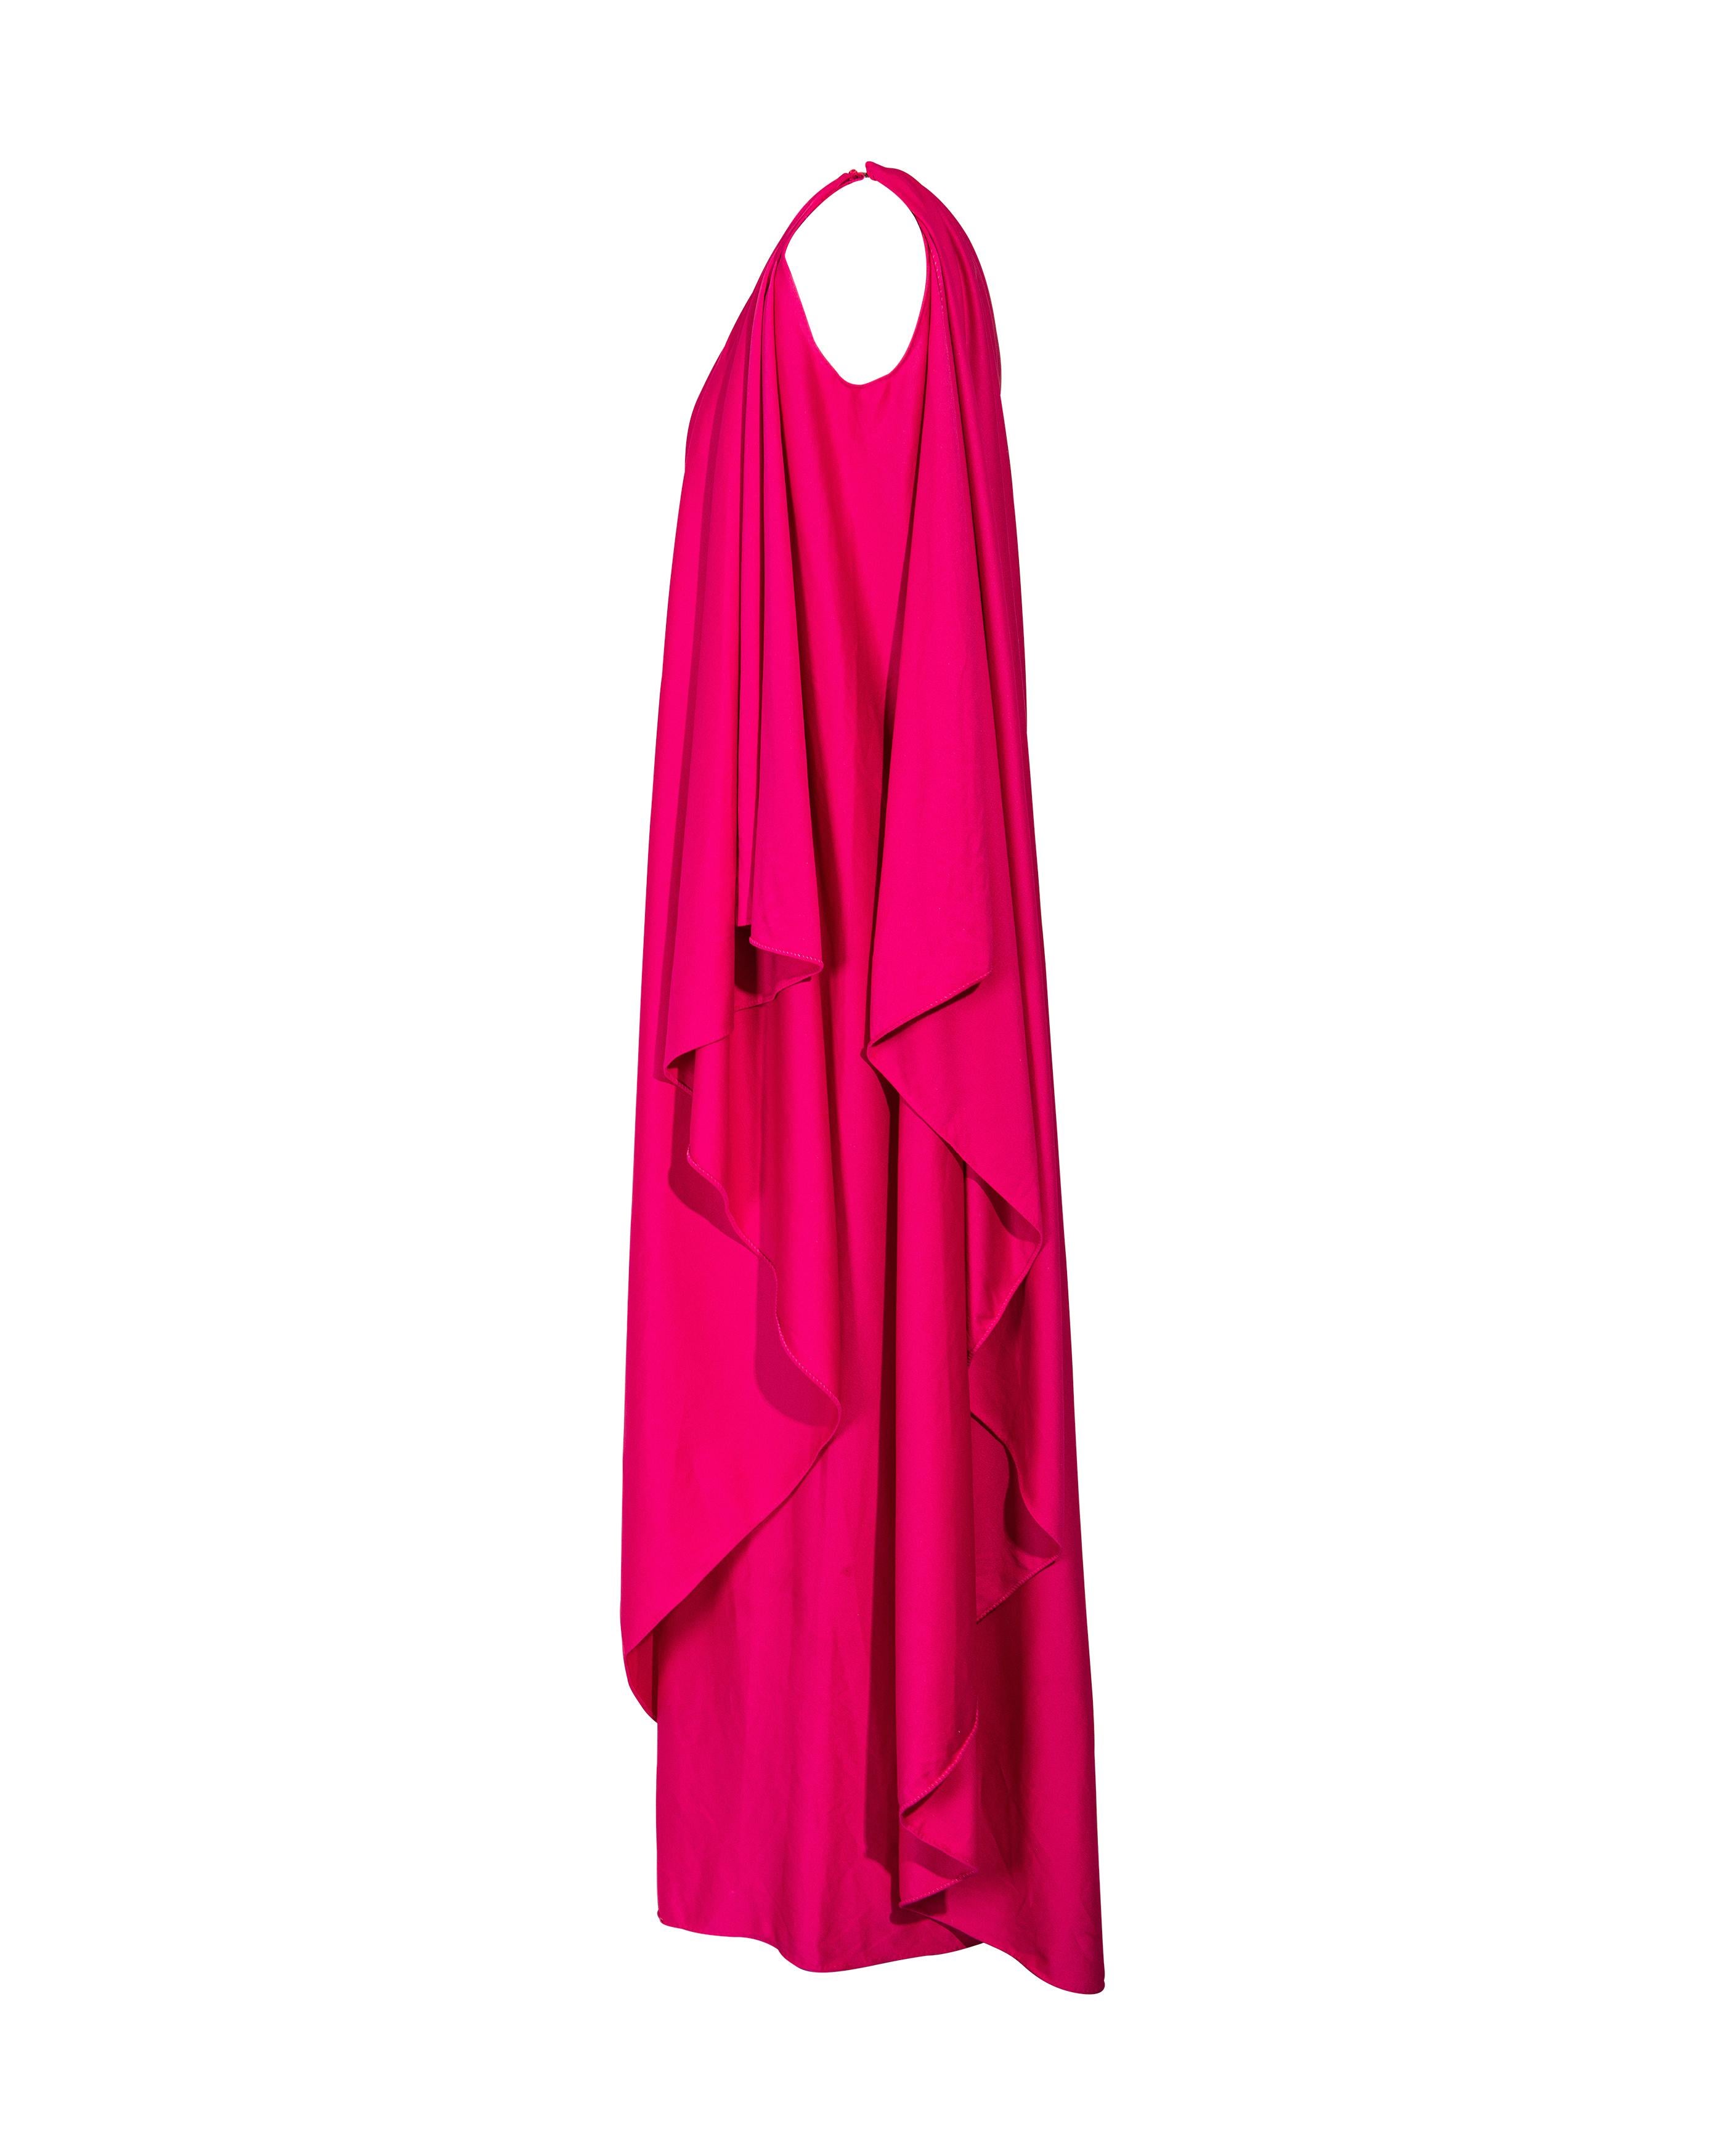 1970's Halston IV pink one-shoulder drape gown. Features layered fabric at sides. Hook closure at shoulder. In very good vintage condition with light wear throughout.